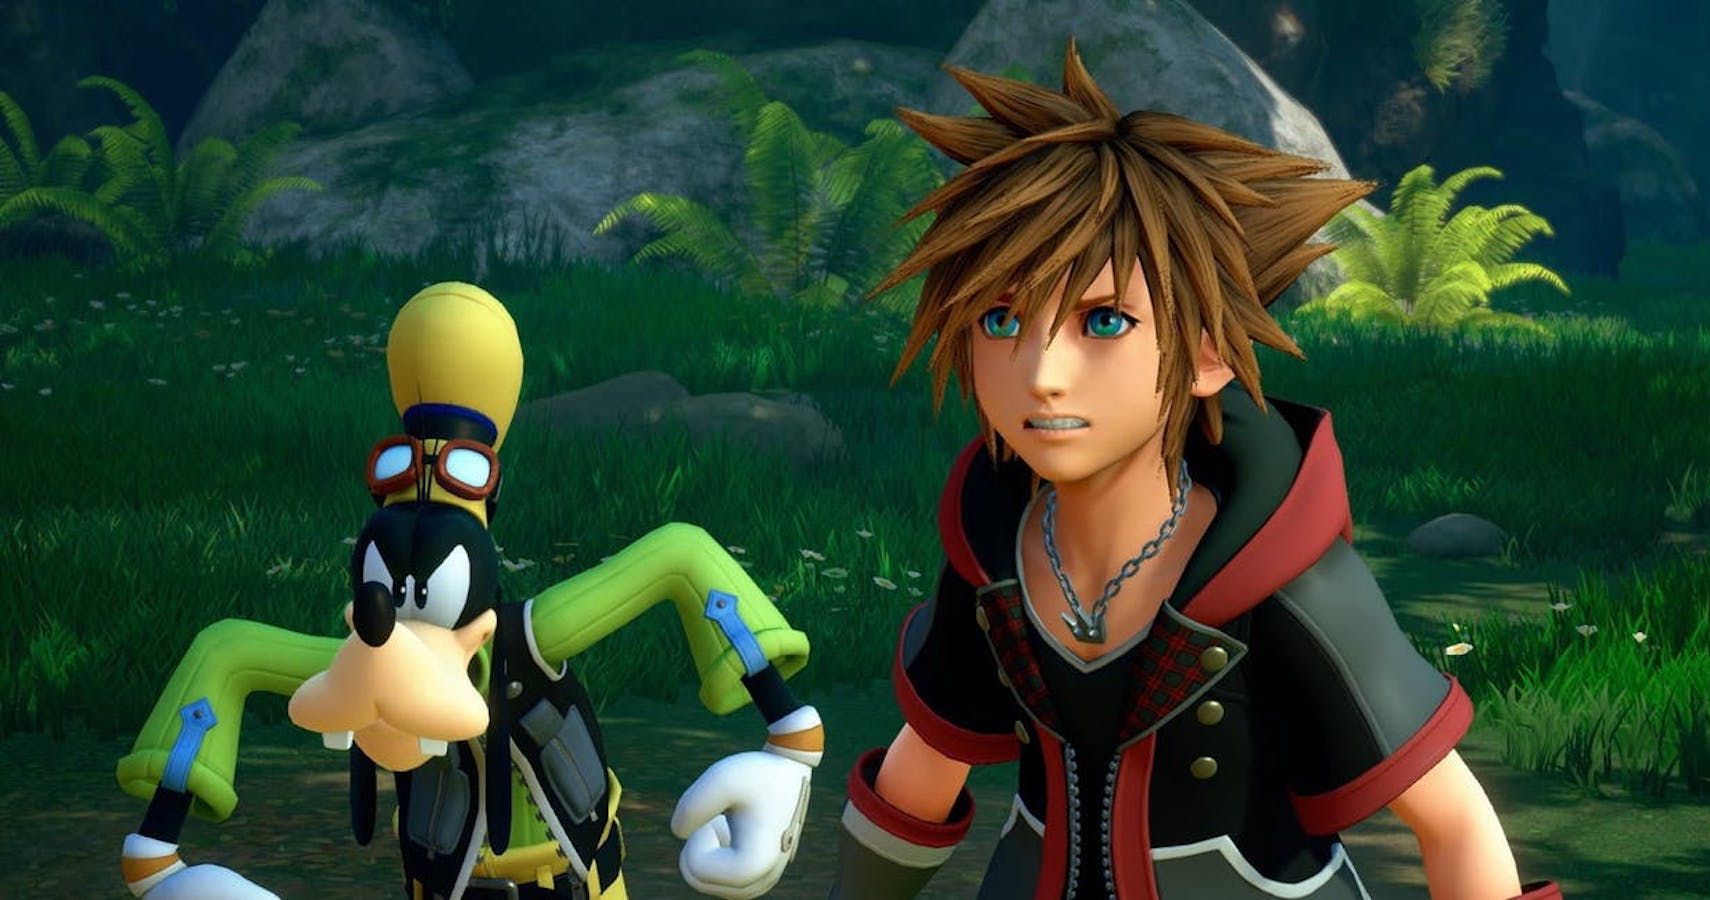 Tetsuya Nomura Confirms That Another Kingdom Hearts Game Will Be Released Before KH4